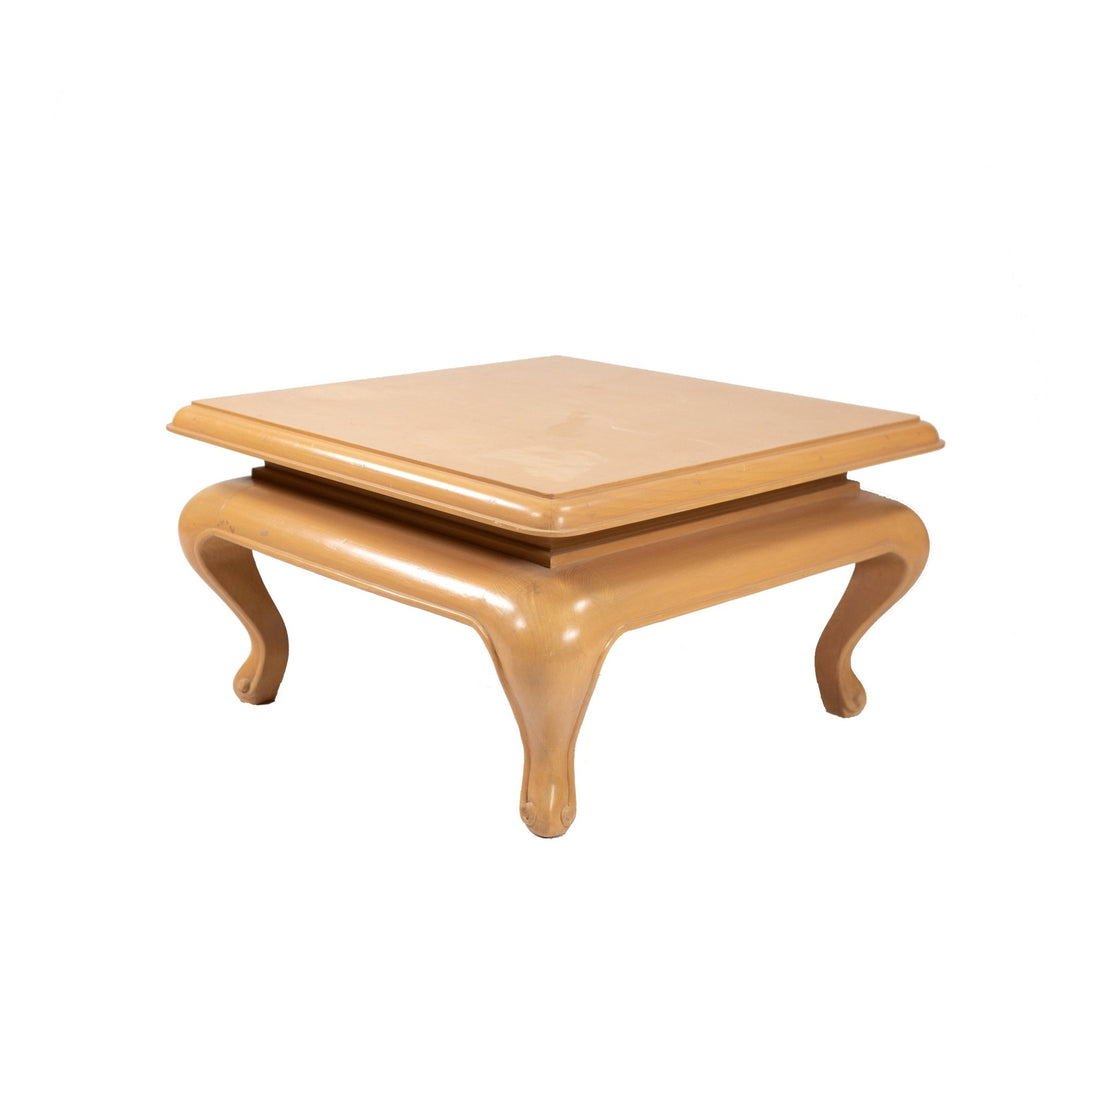 Wooden Short Side Table - Sirdab - Unknown